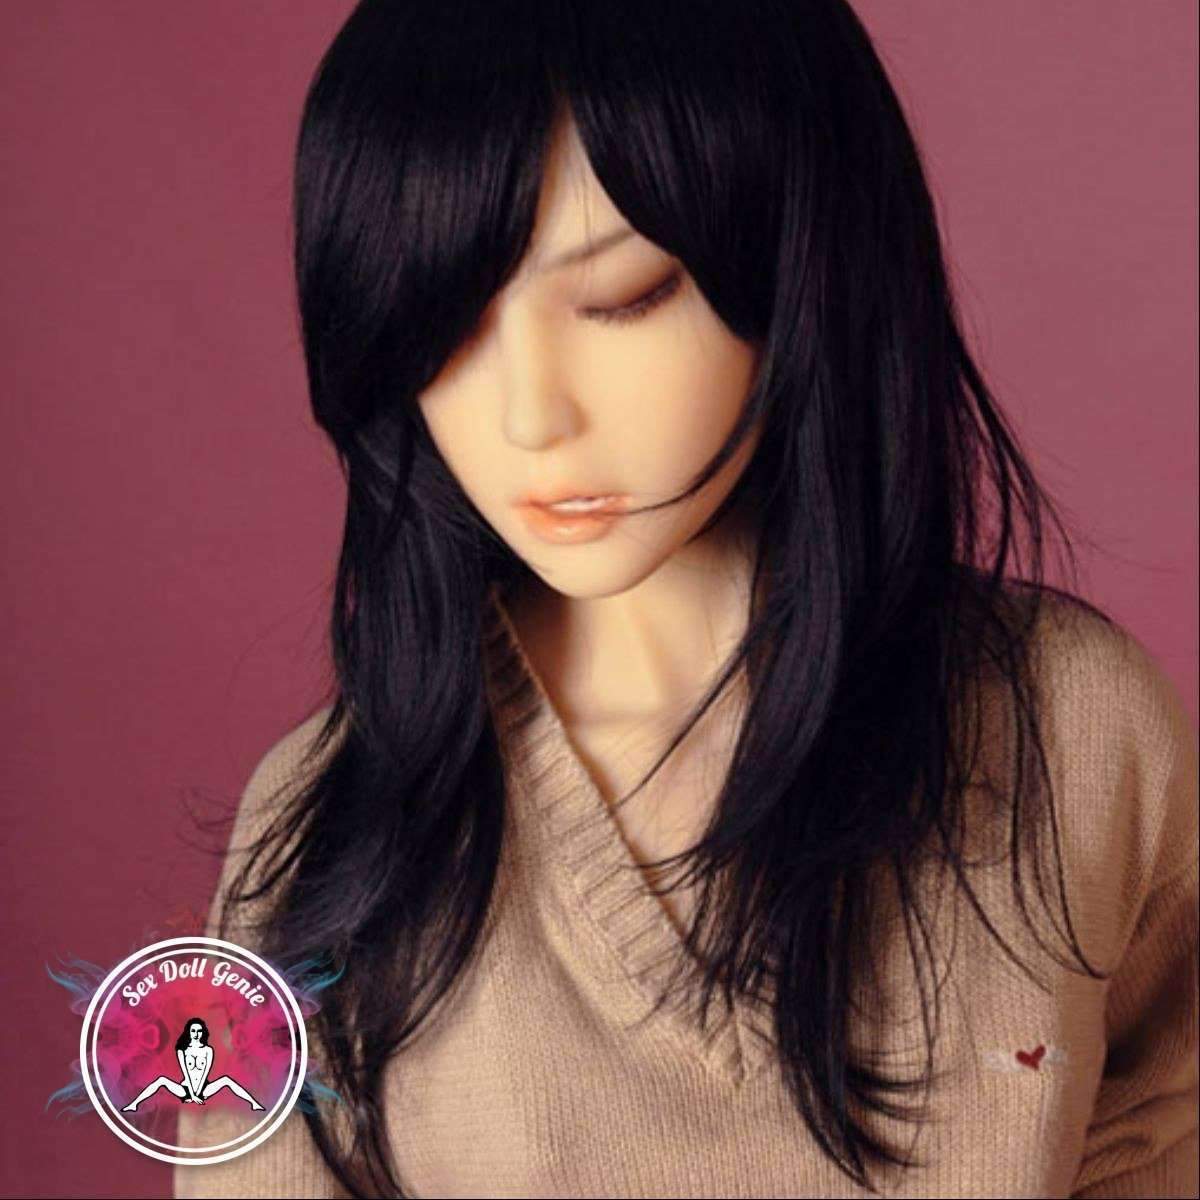 DS Doll - 163 - KaylaCE Head - Type 1 D Cup Silicone Doll-12